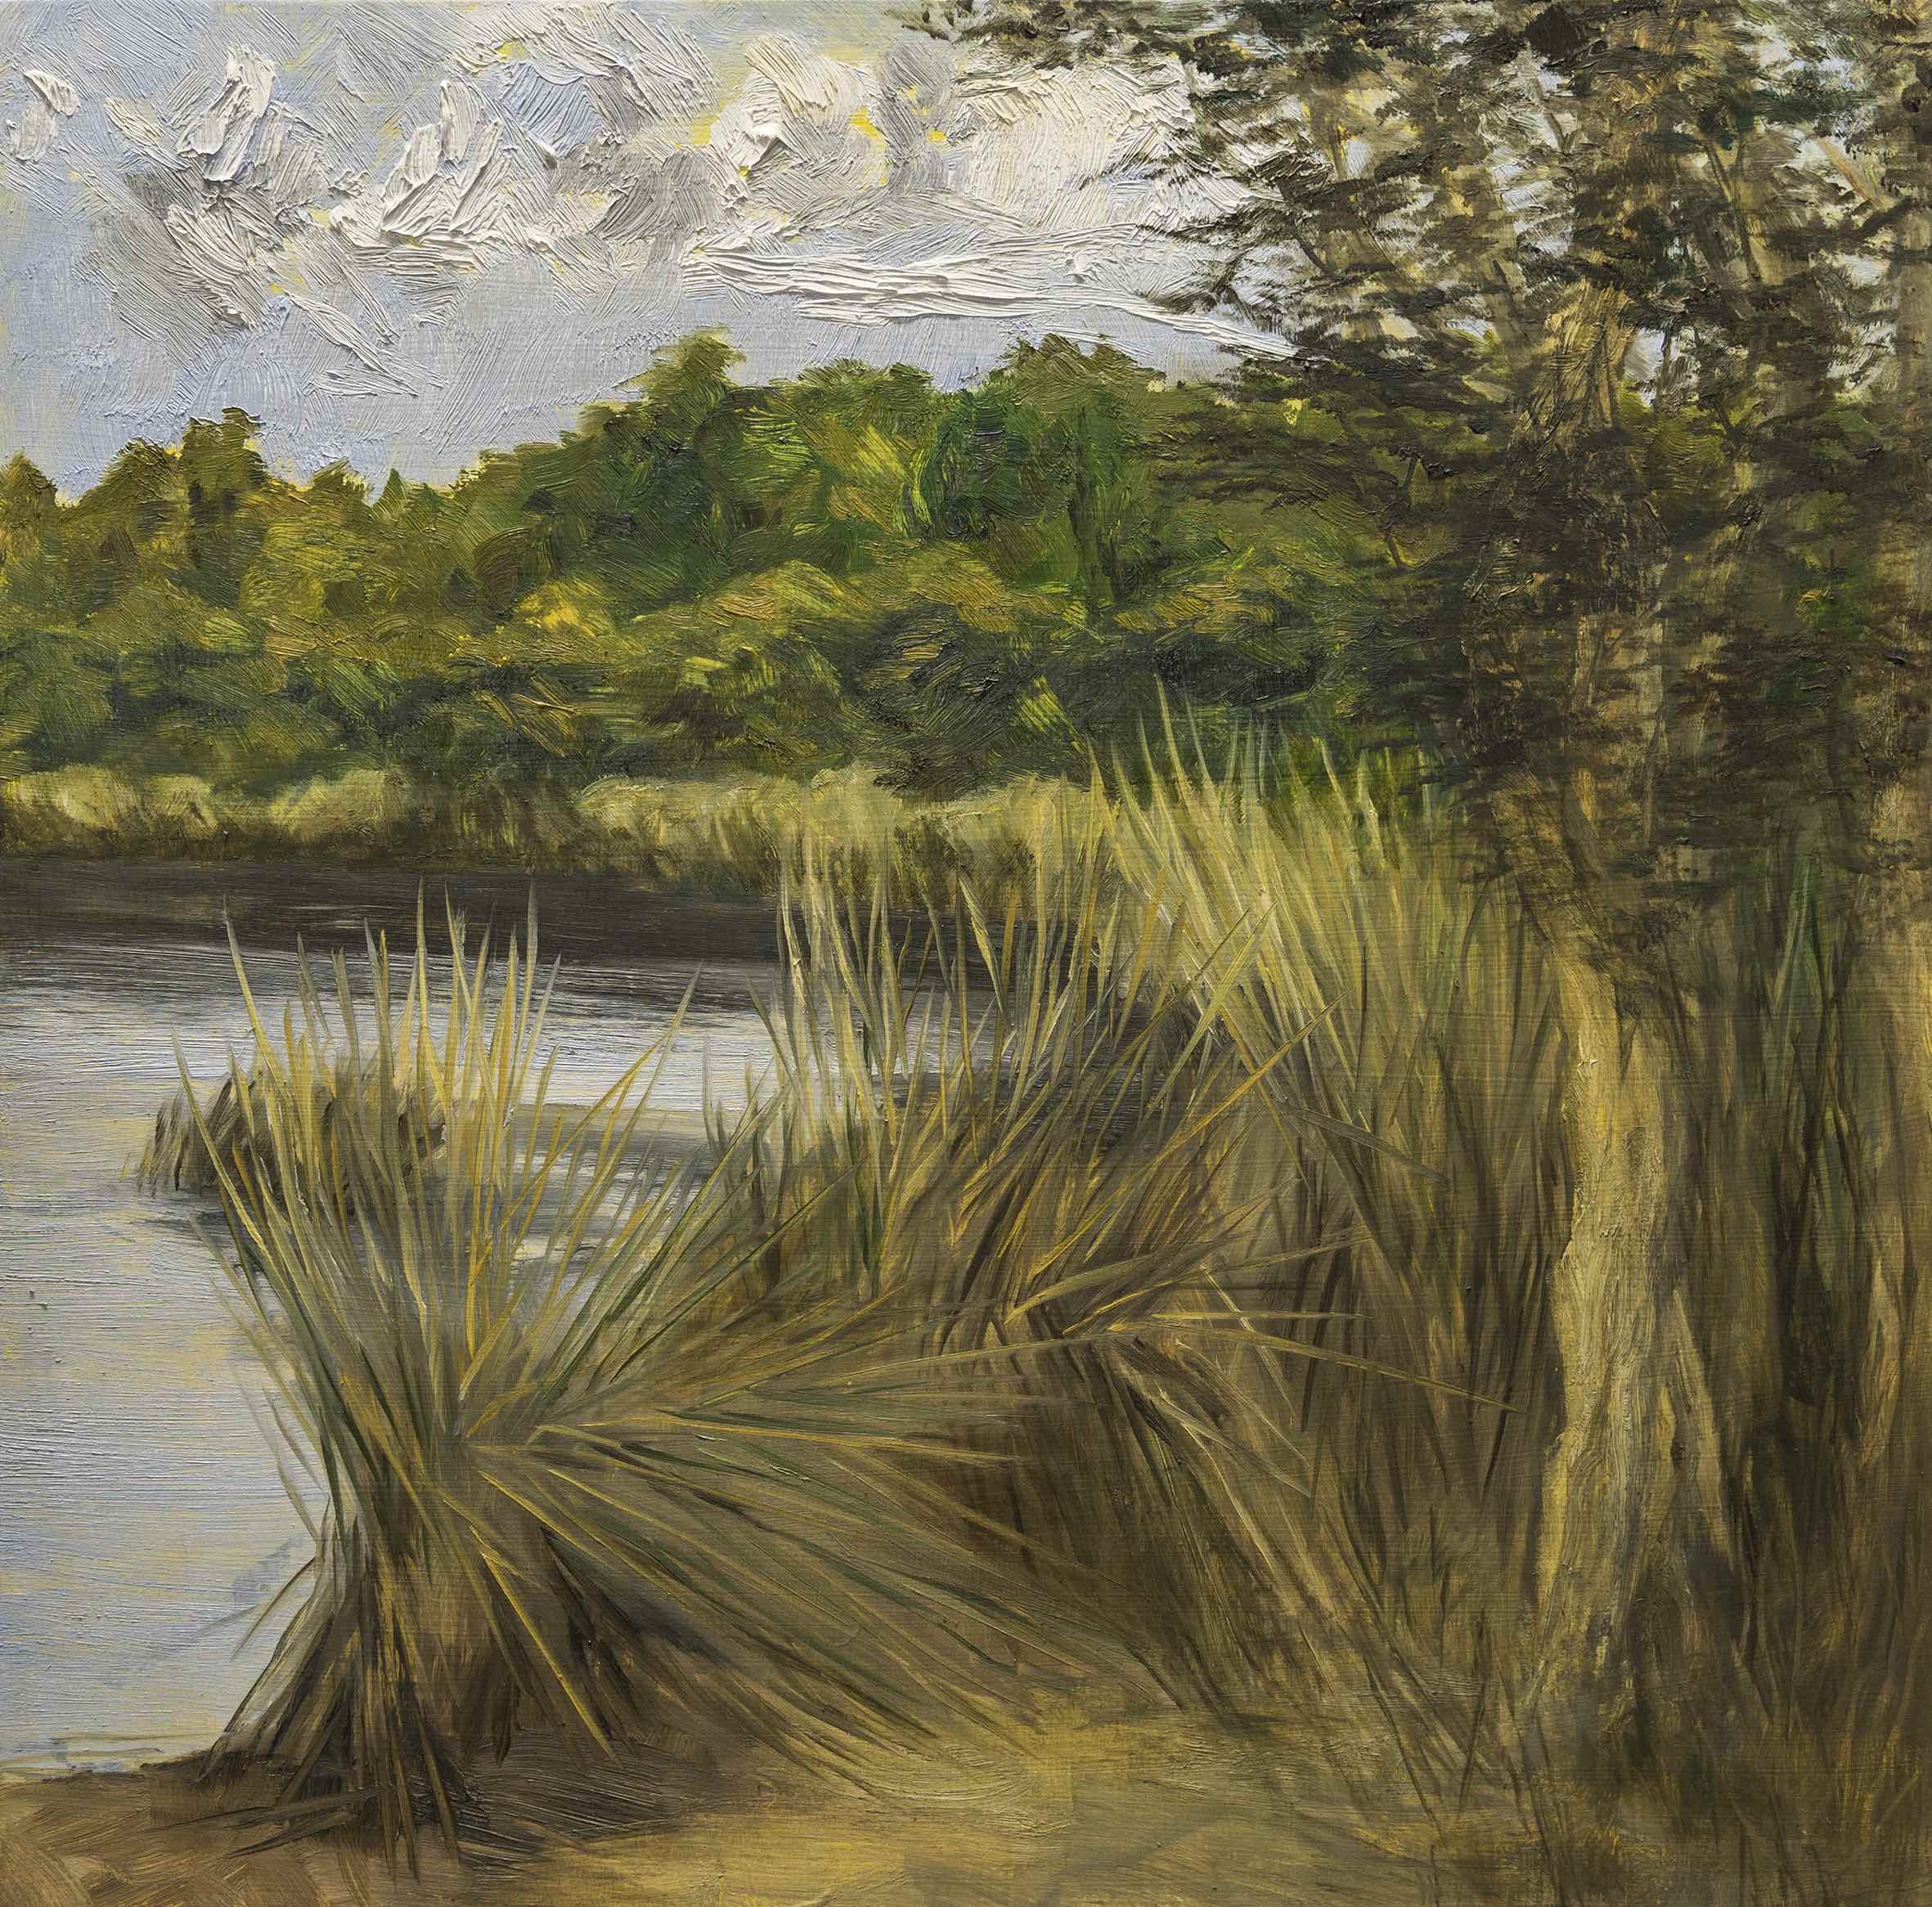 Whispering Reeds, oil on board, 40 x 40 cm, Sold